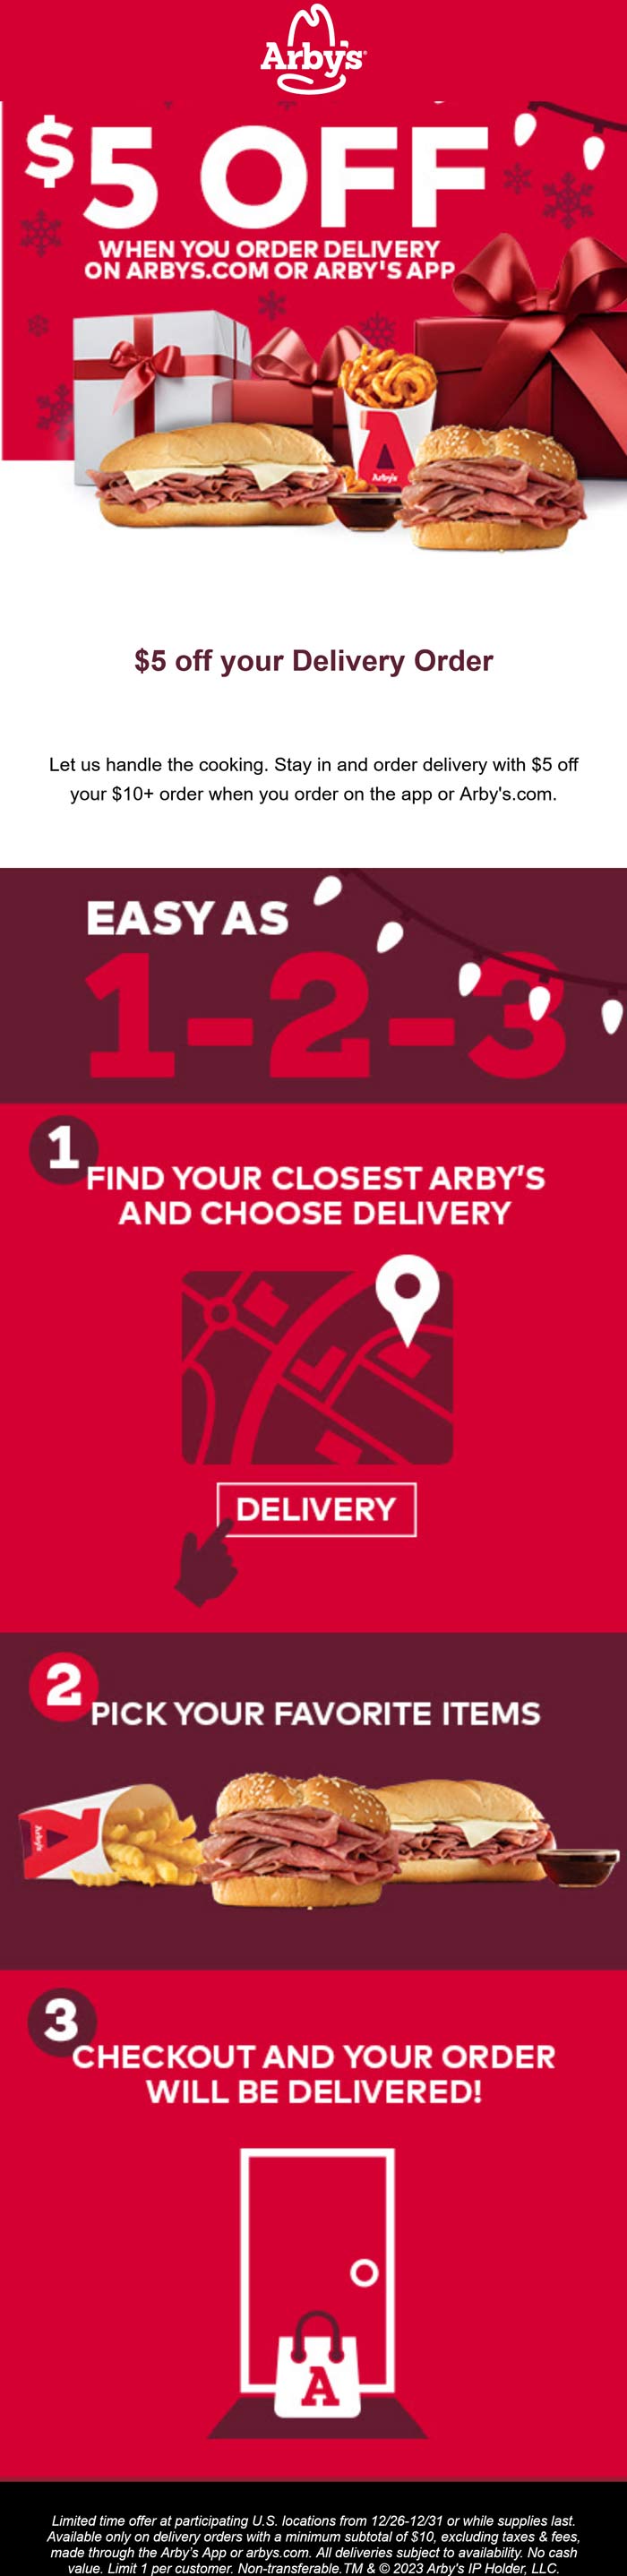 $5 off $10+ delivery orders at Arbys restaurants #arbys